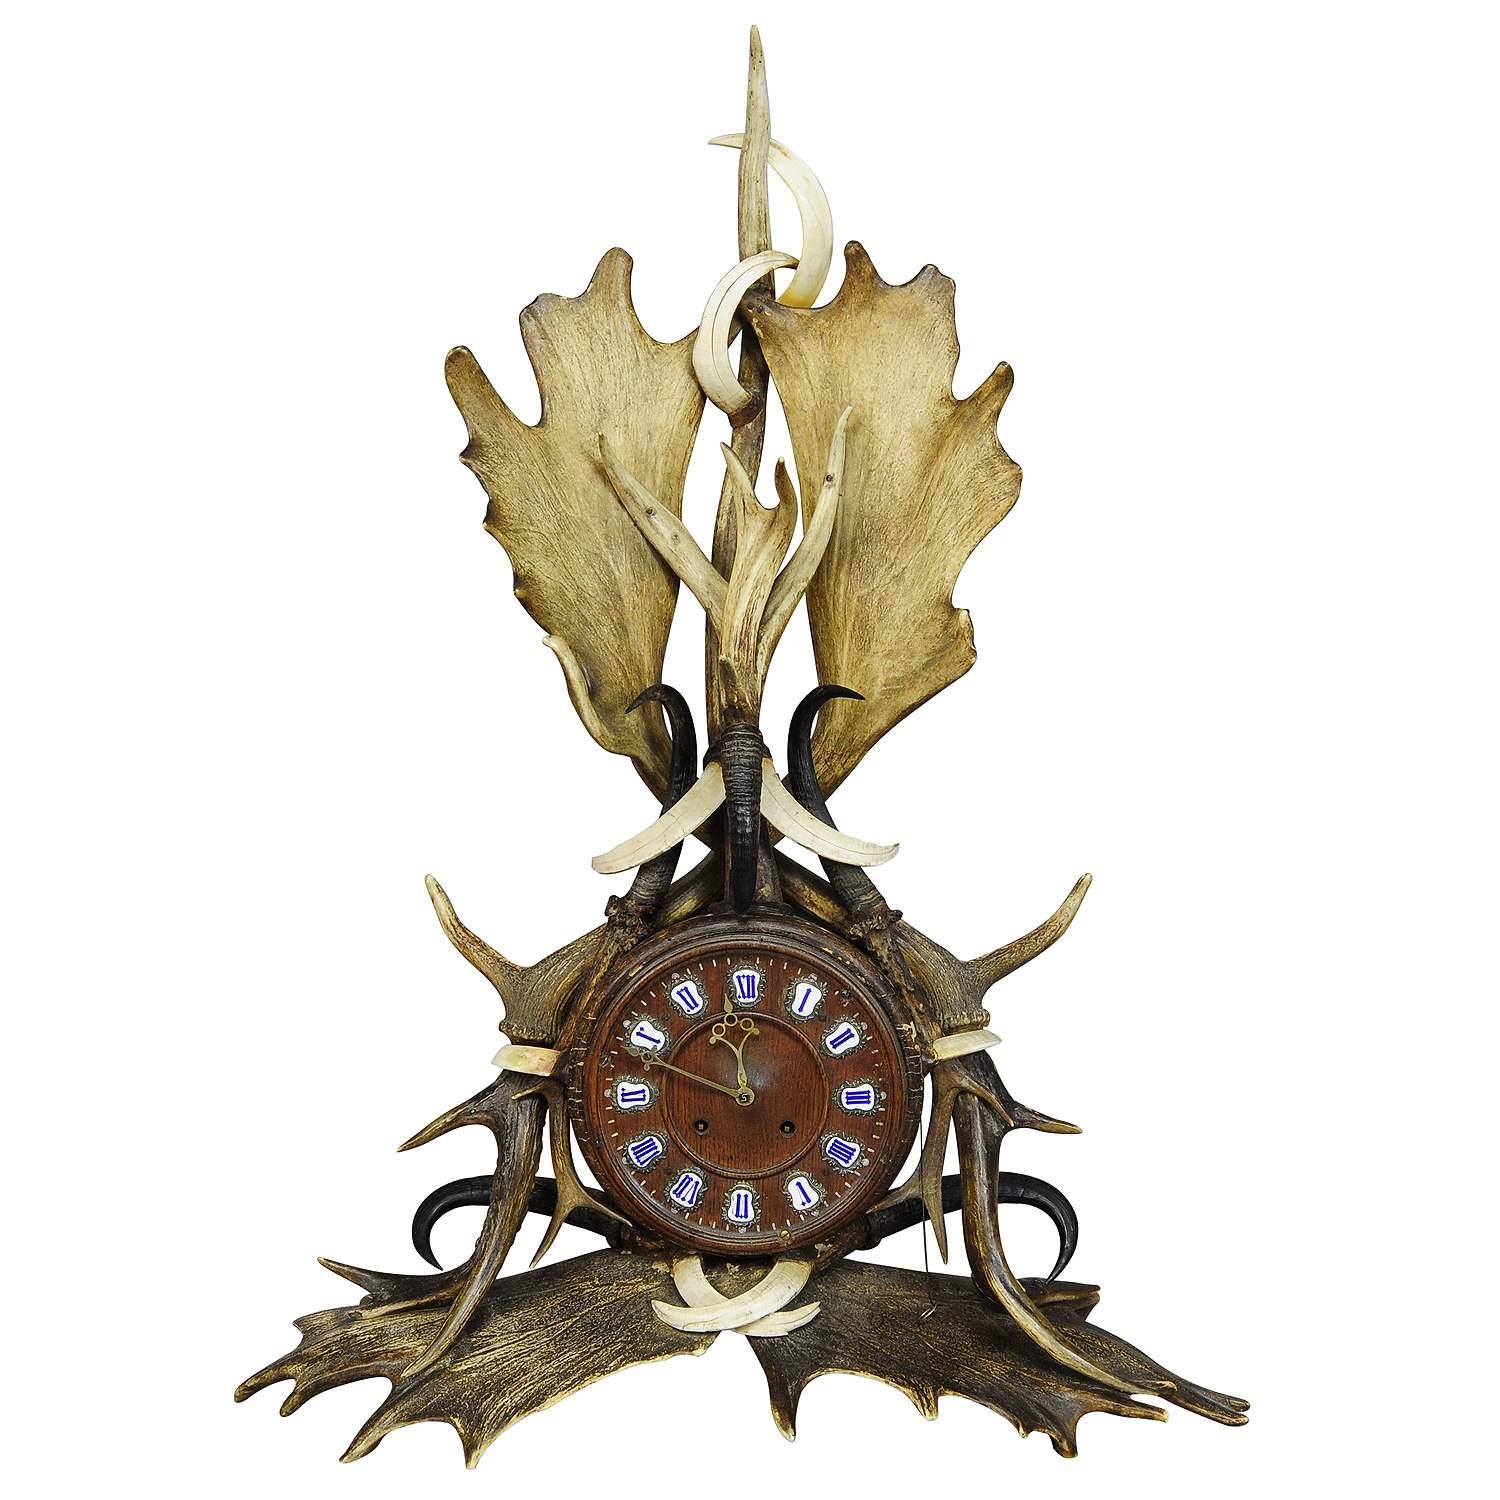 Great Lodge Style Antler Mantel Clock 1900

A rare antique lodge style mantel clock. Oakwood case, richly decorated with antlers from the deer and fallow deer, mountain goat antlers and wildboar tusks. The 8-day clockwork is in working order,